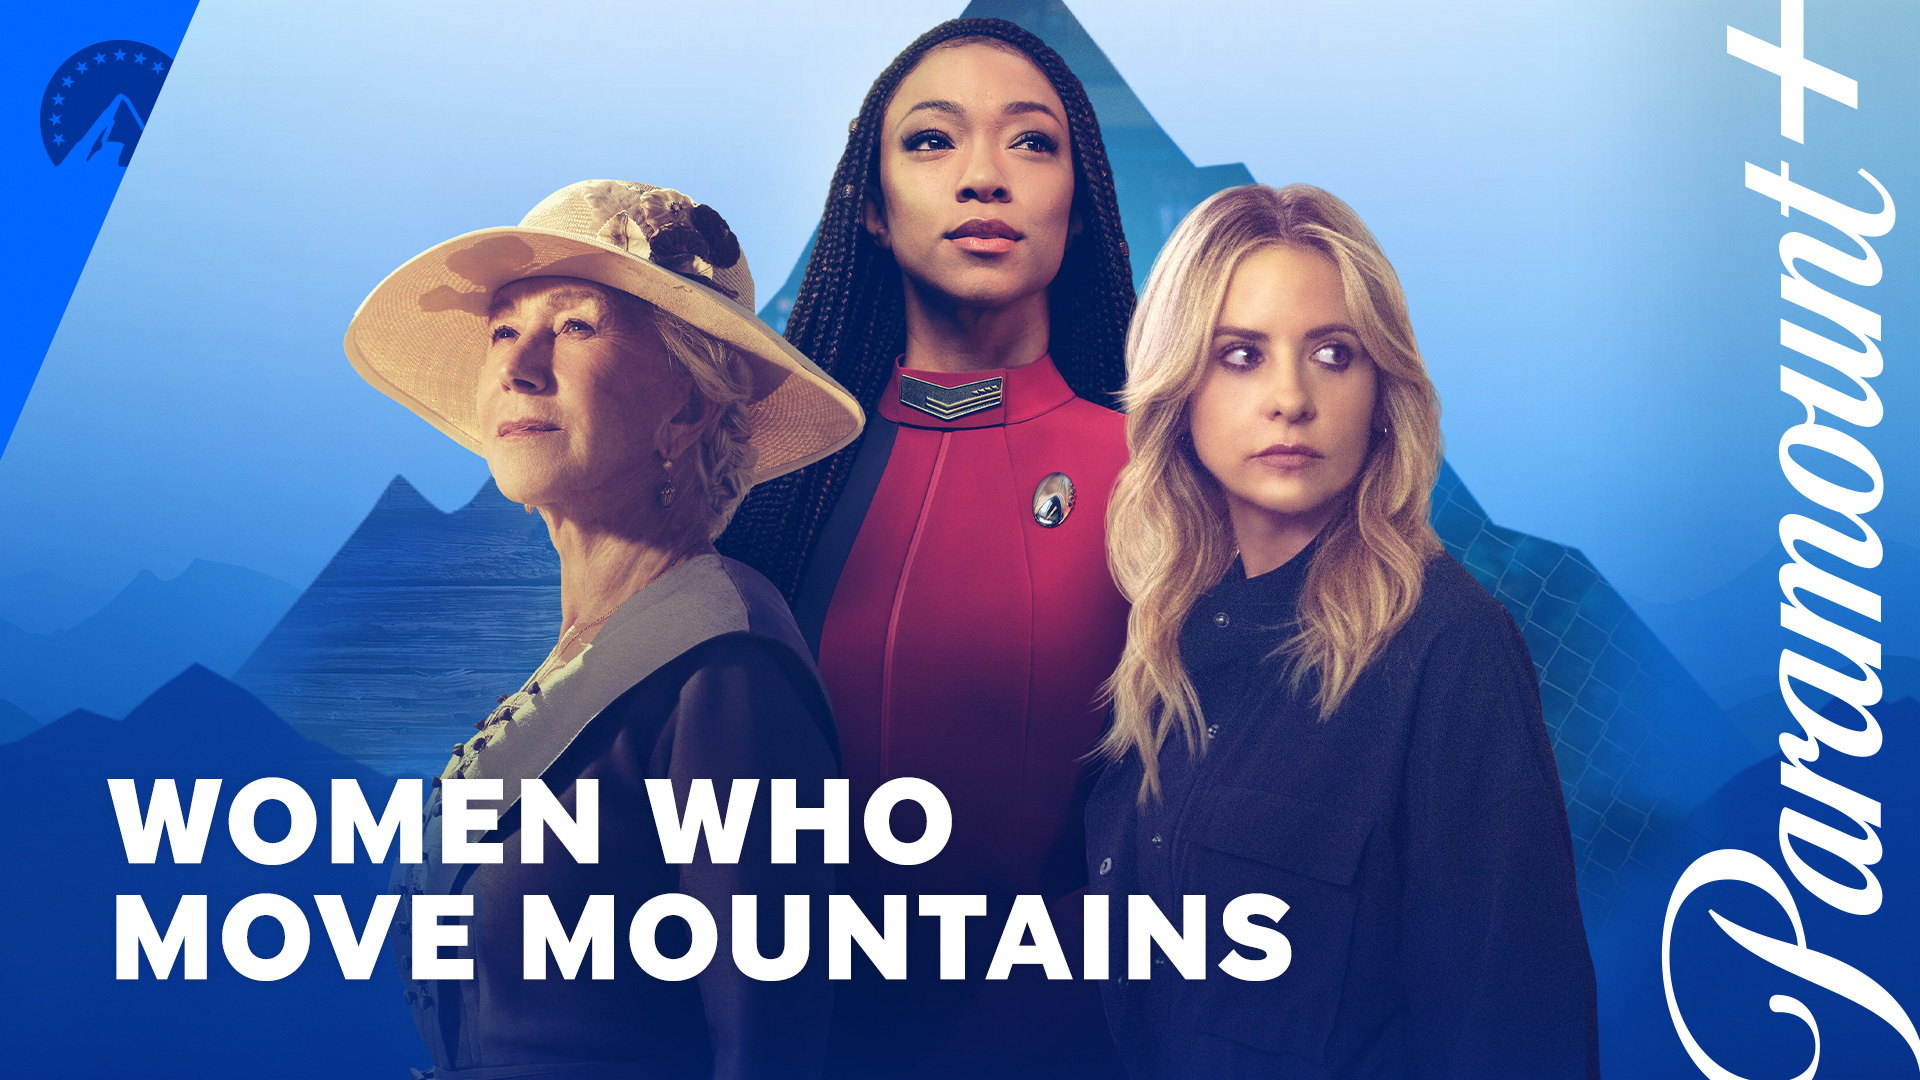 Watch Paramount +: Women Who Move Mountains - Full show on